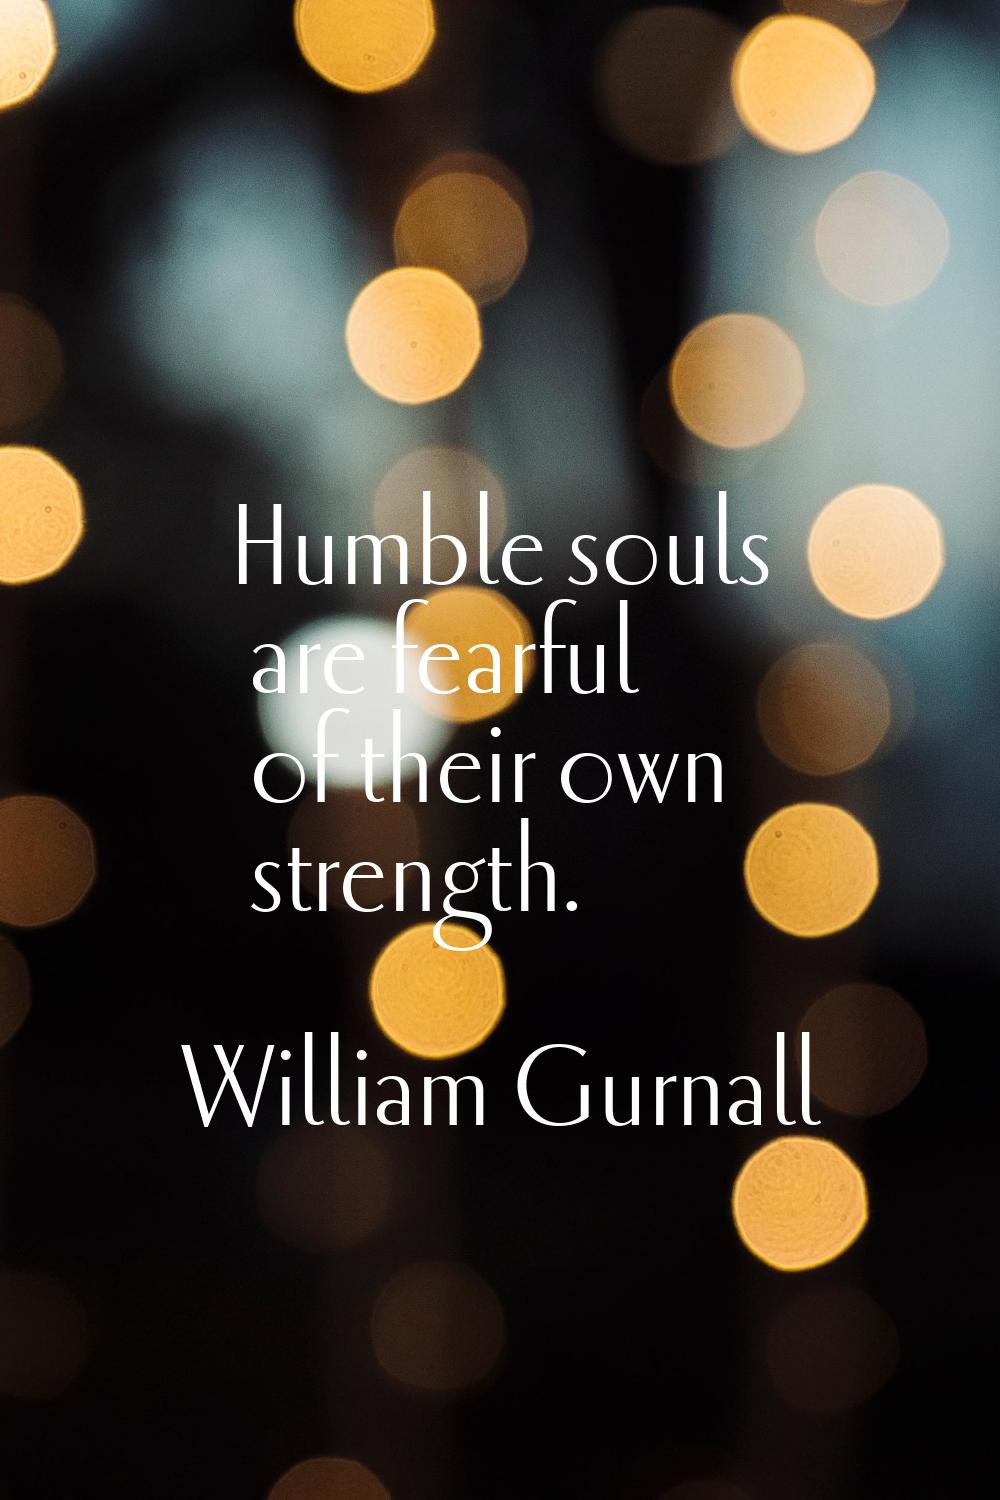 Humble souls are fearful of their own strength.